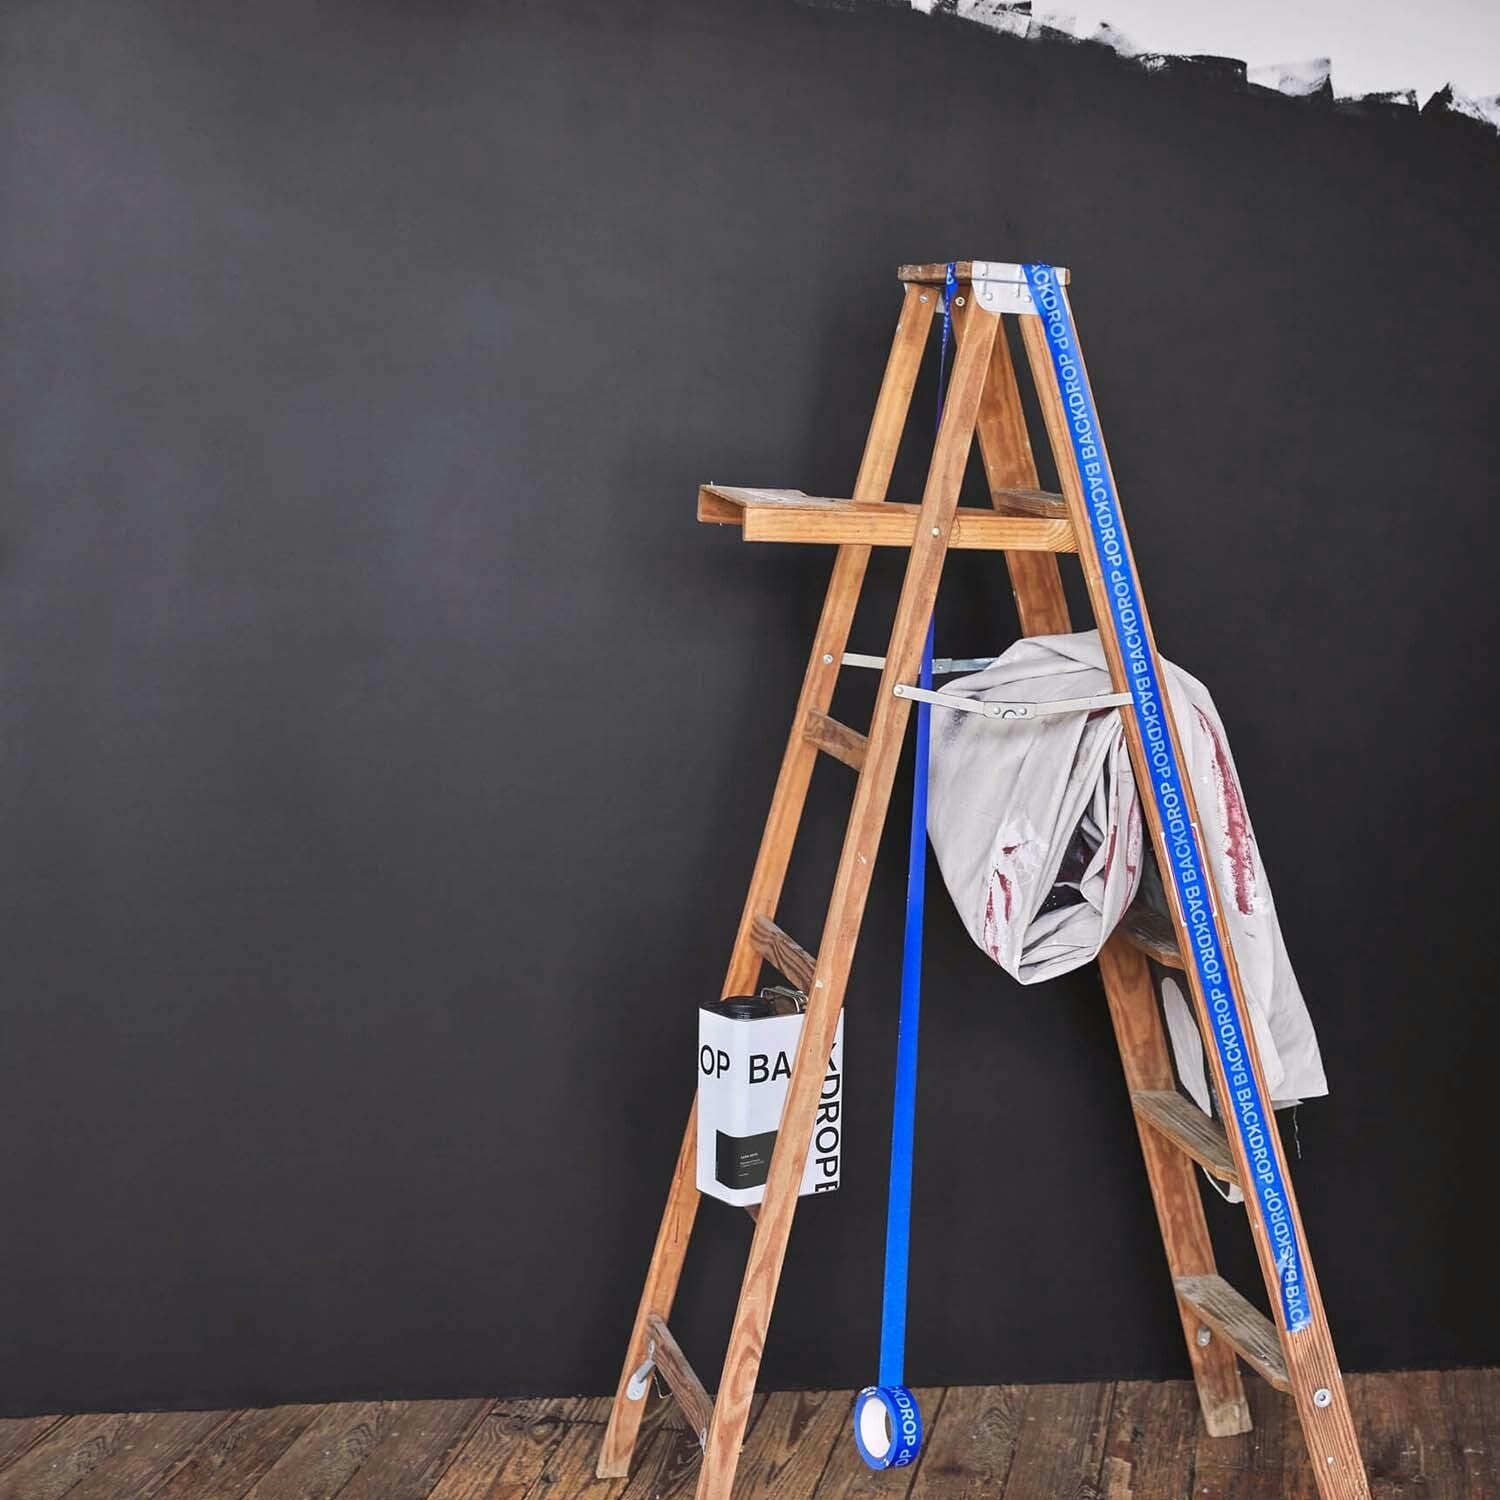 A ladder next to a painted wall.